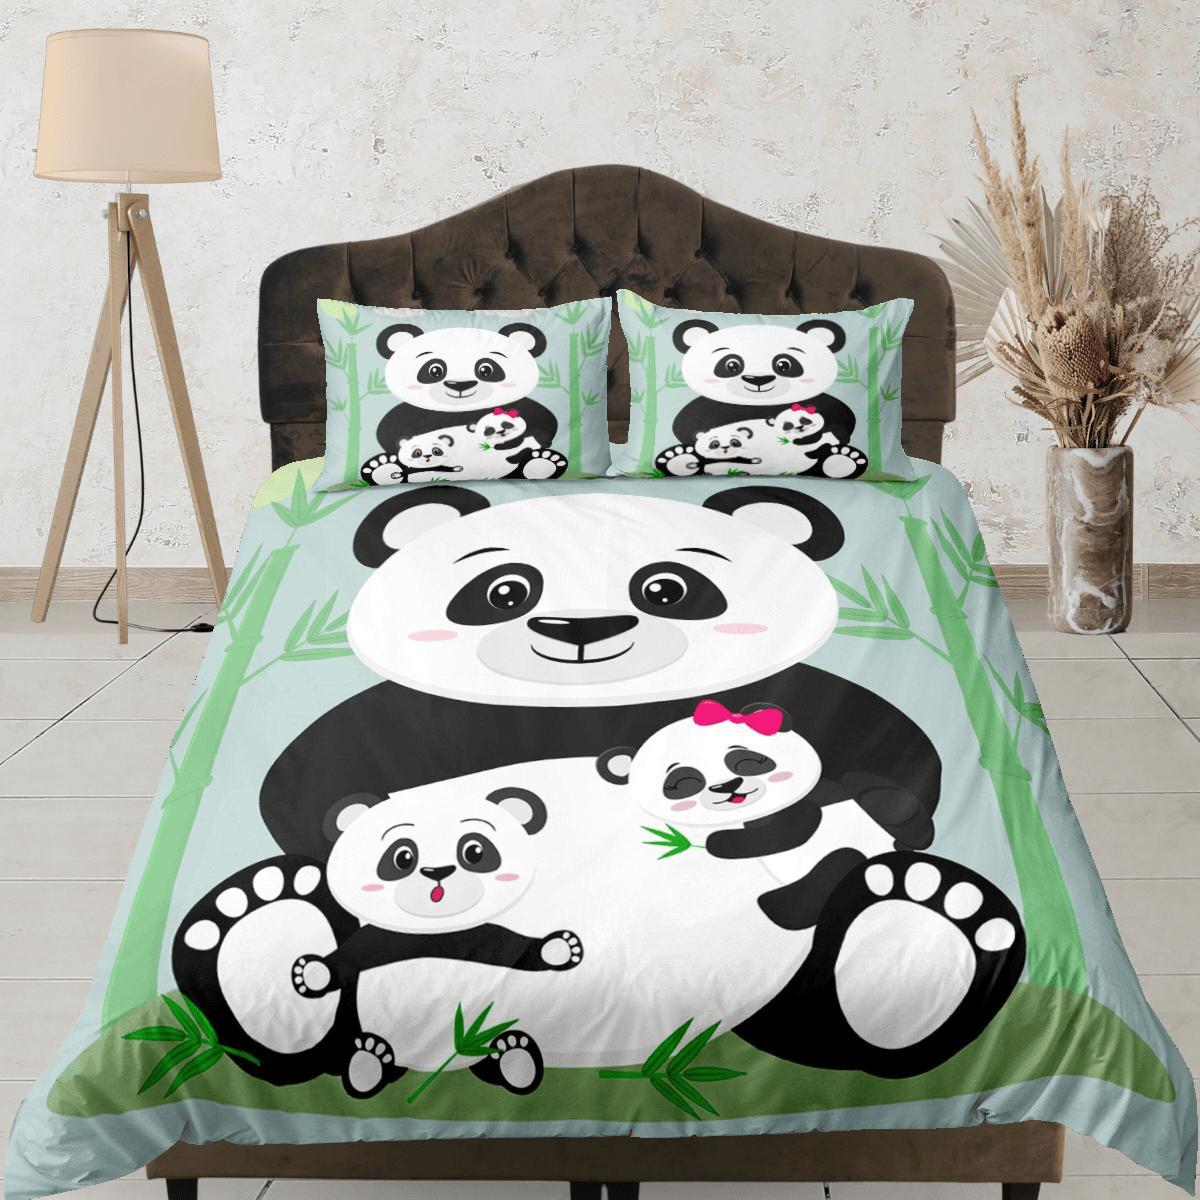 daintyduvet Cute Panda Family Duvet Cover Set Colorful Bedspread, Kids Bedding with Pillowcase